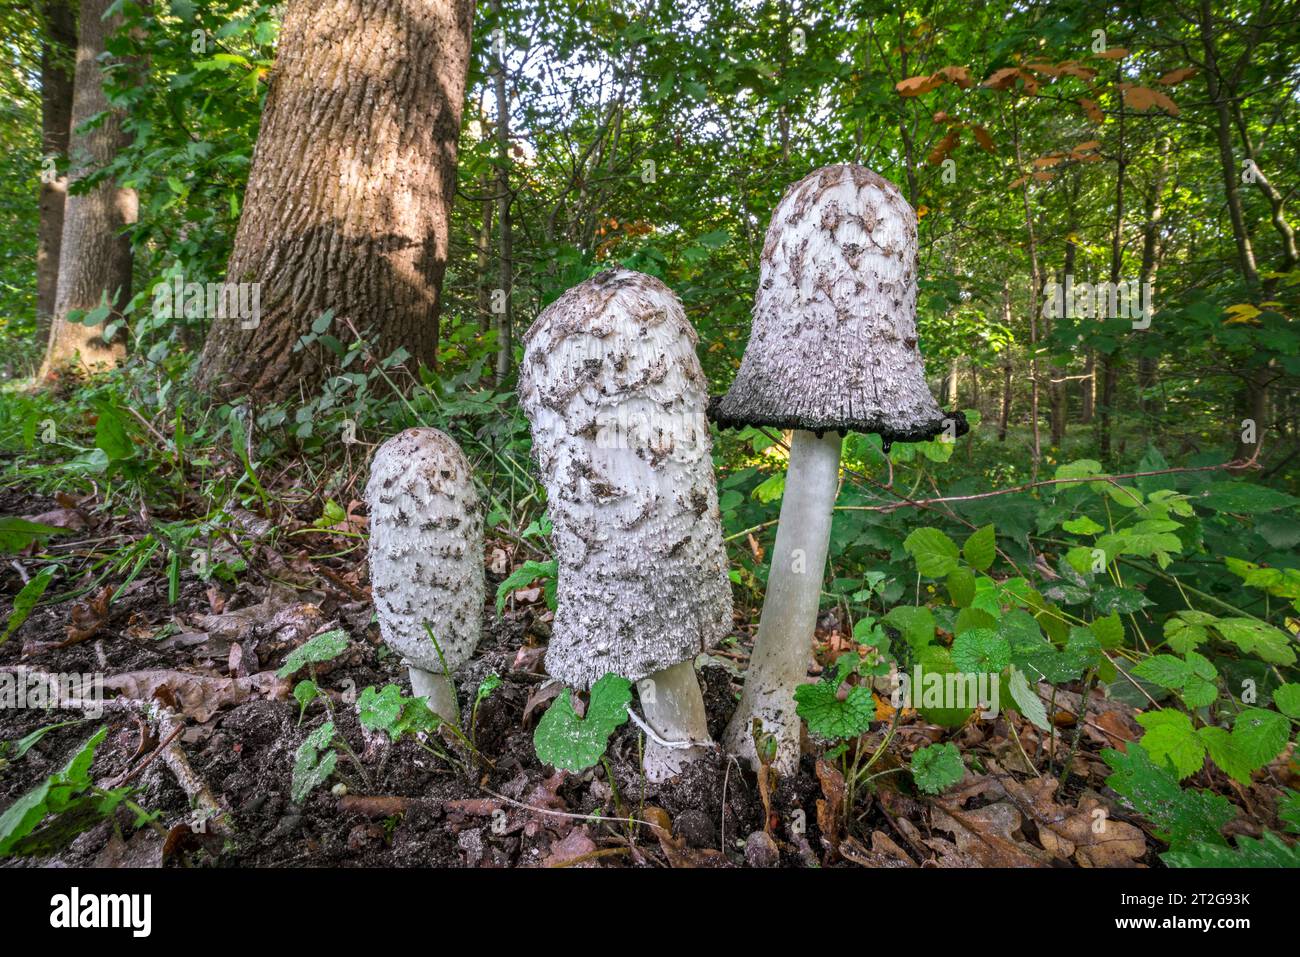 Shaggy ink cap / lawyer's wig / shaggy mane (Coprinus comatus) showing different growth stages in forest in autumn / fall Stock Photo